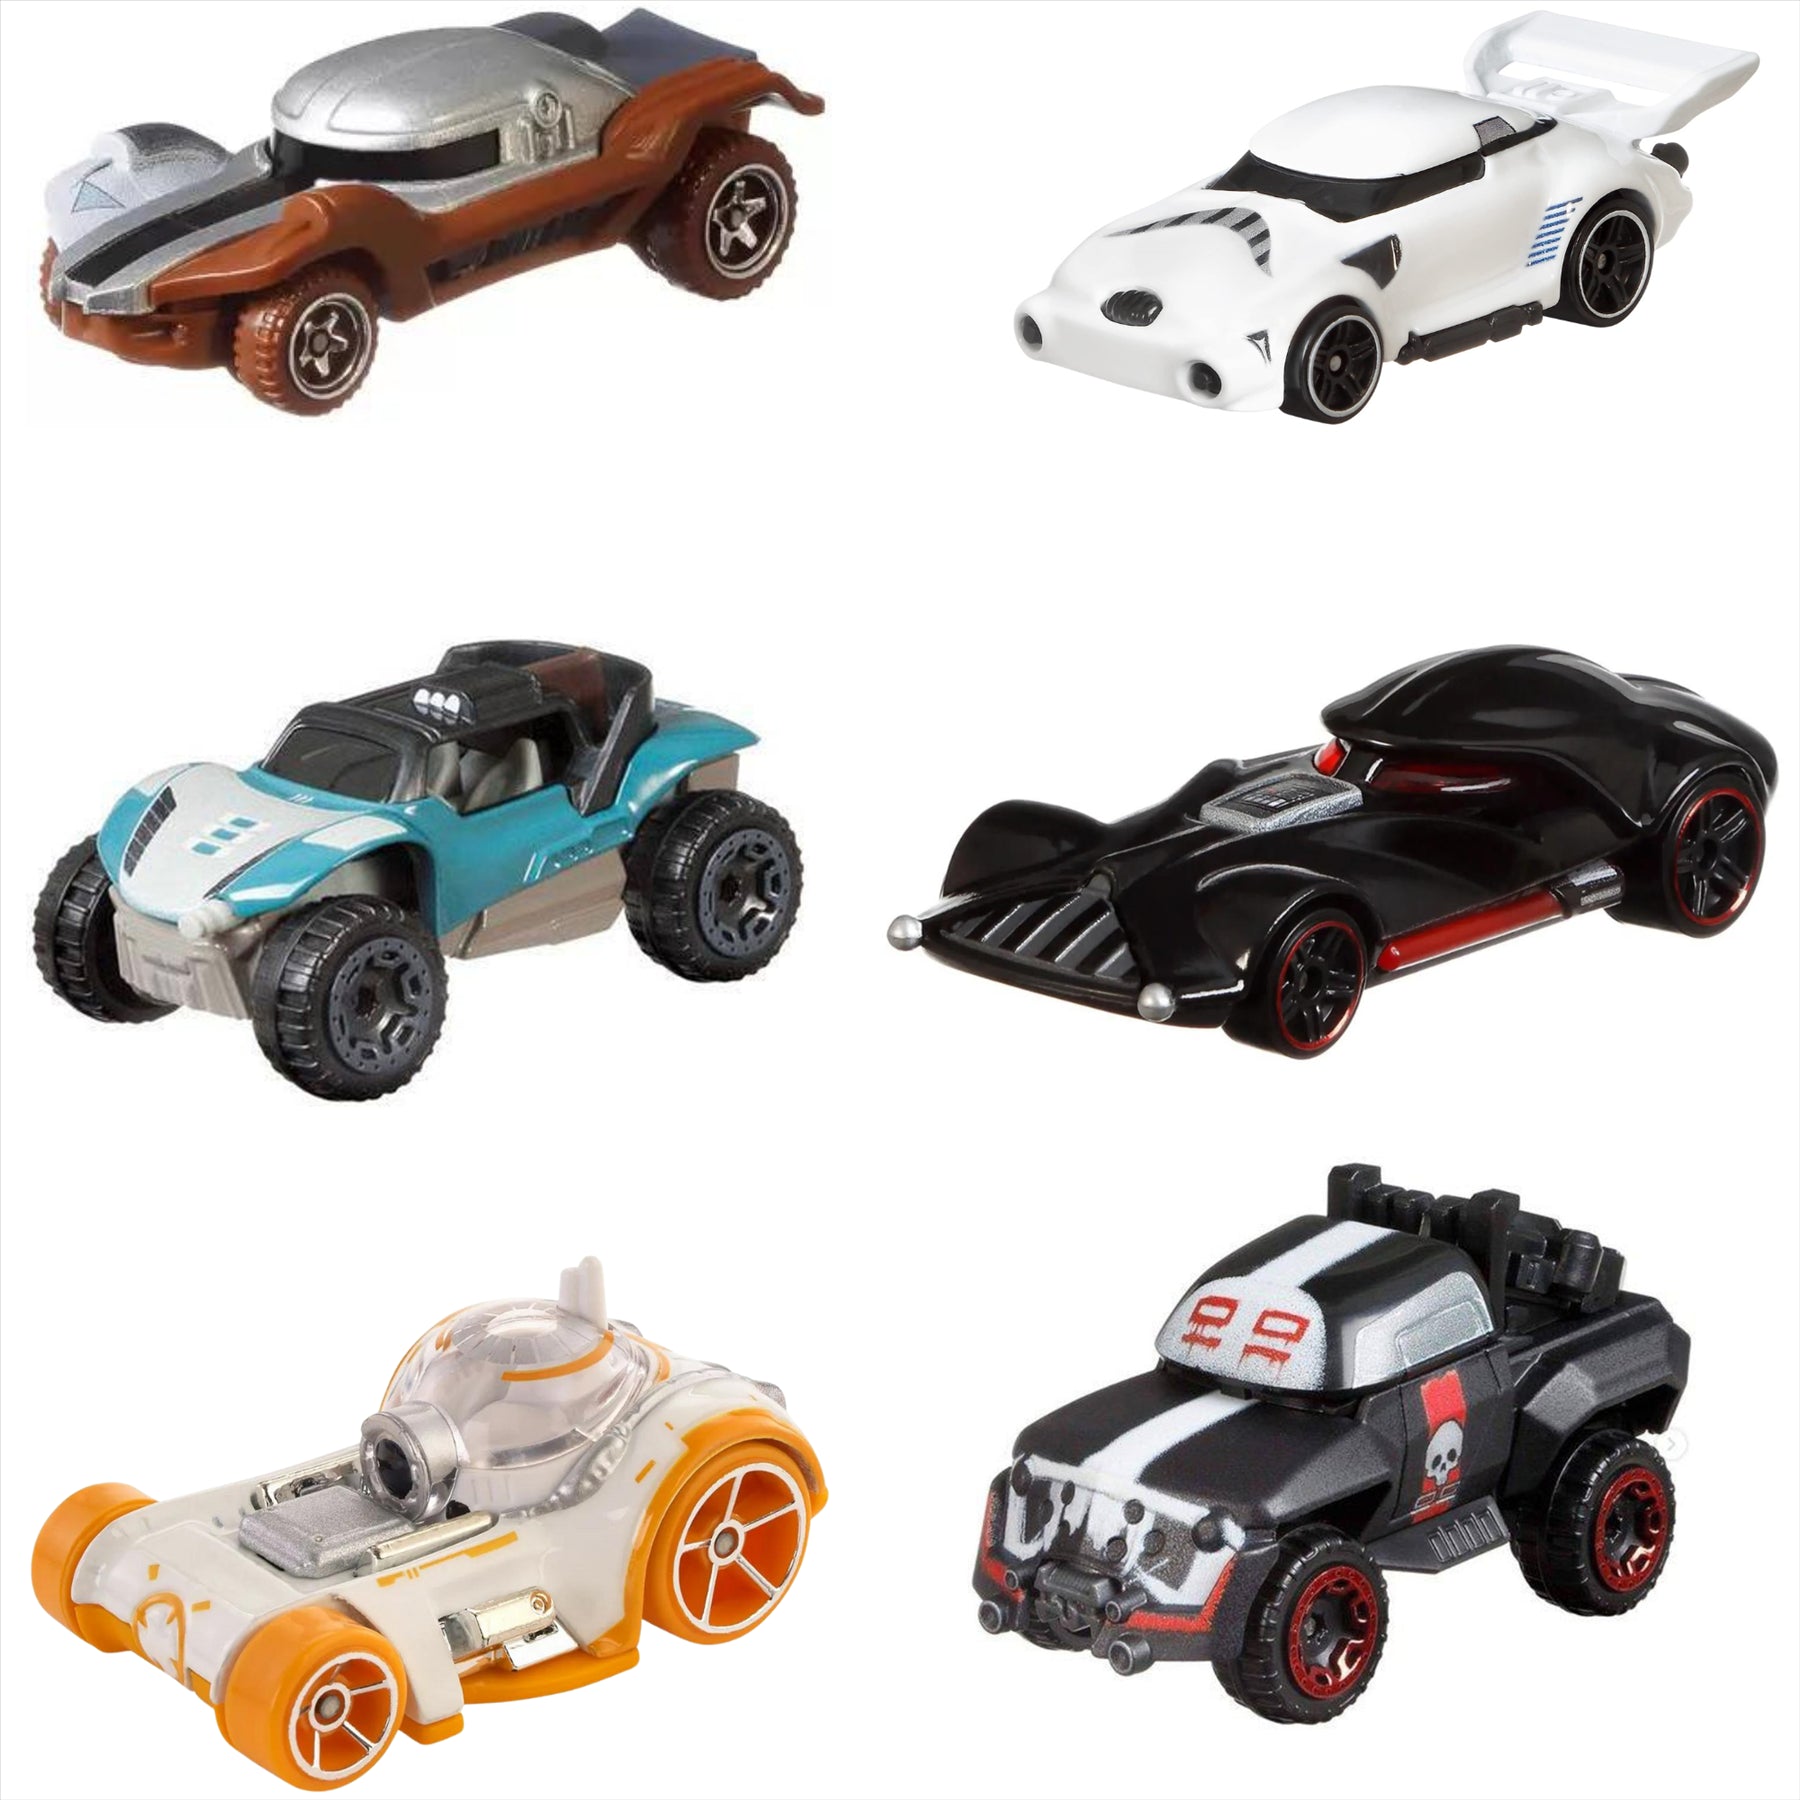 Hot Wheels Star Wars Character Cars 1:64 Scale Diecast - (Complete Set of 6) - Toptoys2u